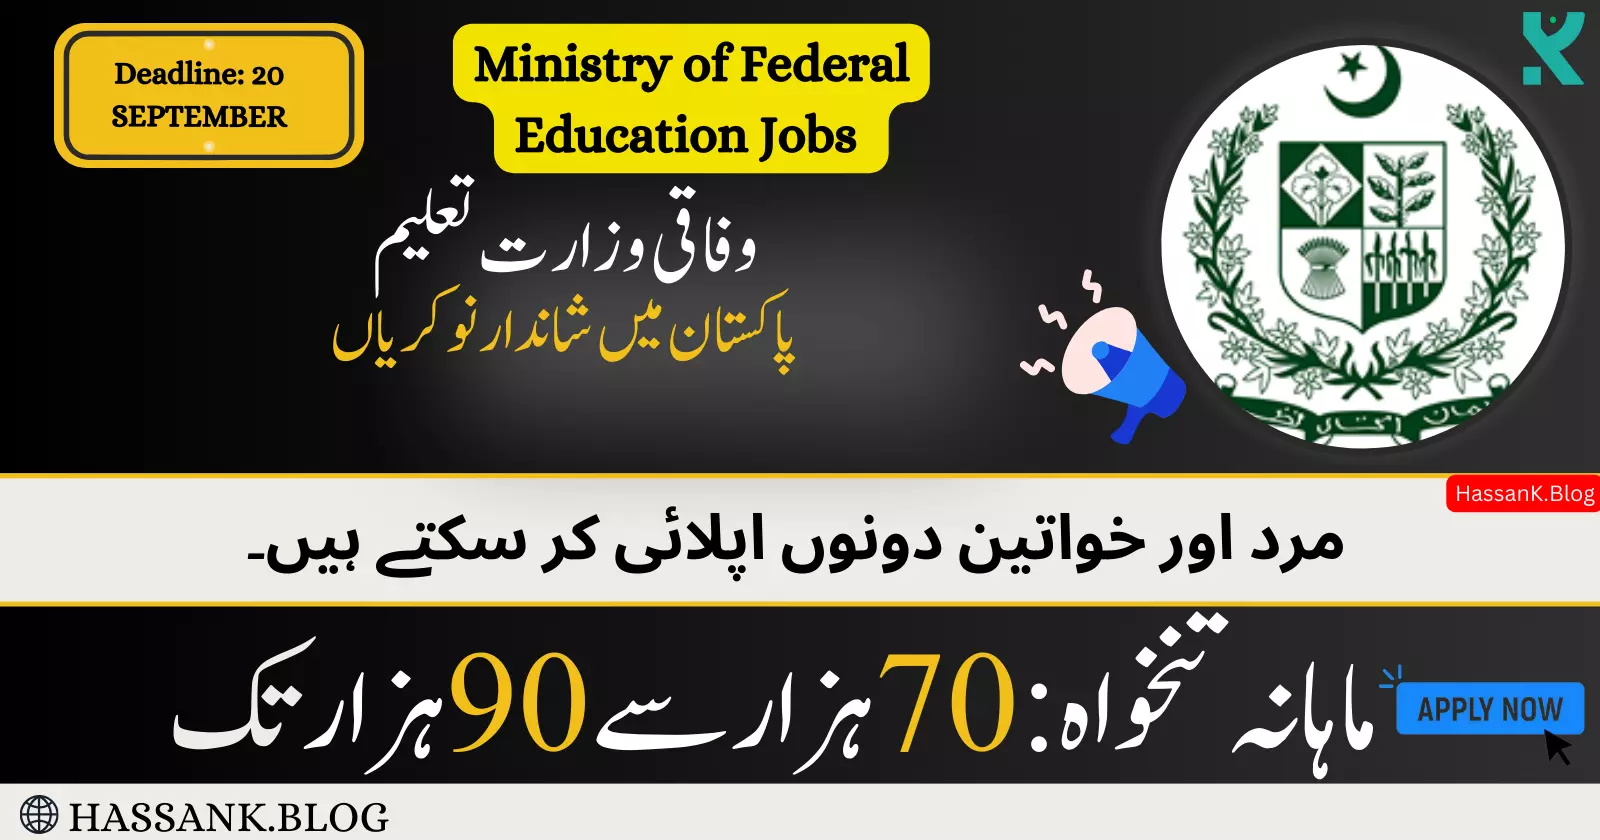 Ministry of Federal Education